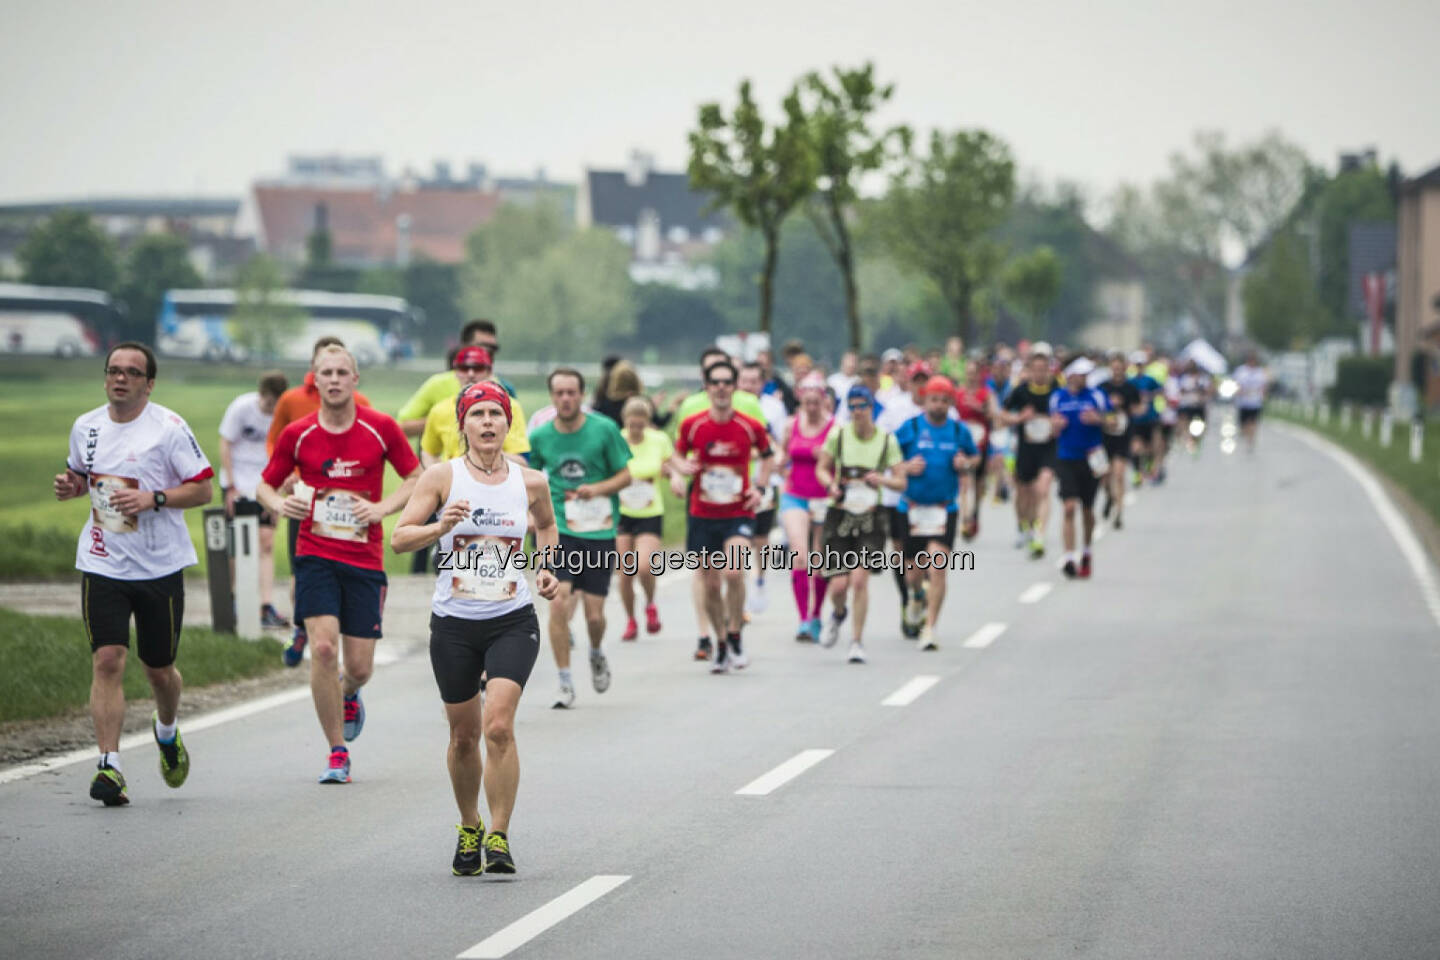 Event participants run during the Wings for Life World Run in St. Poelten, Austria on May 3rd, 2015. // Philip Platzer for Wings for Life World Run // Please go to www.redbullcontentpool.com for further information. // 